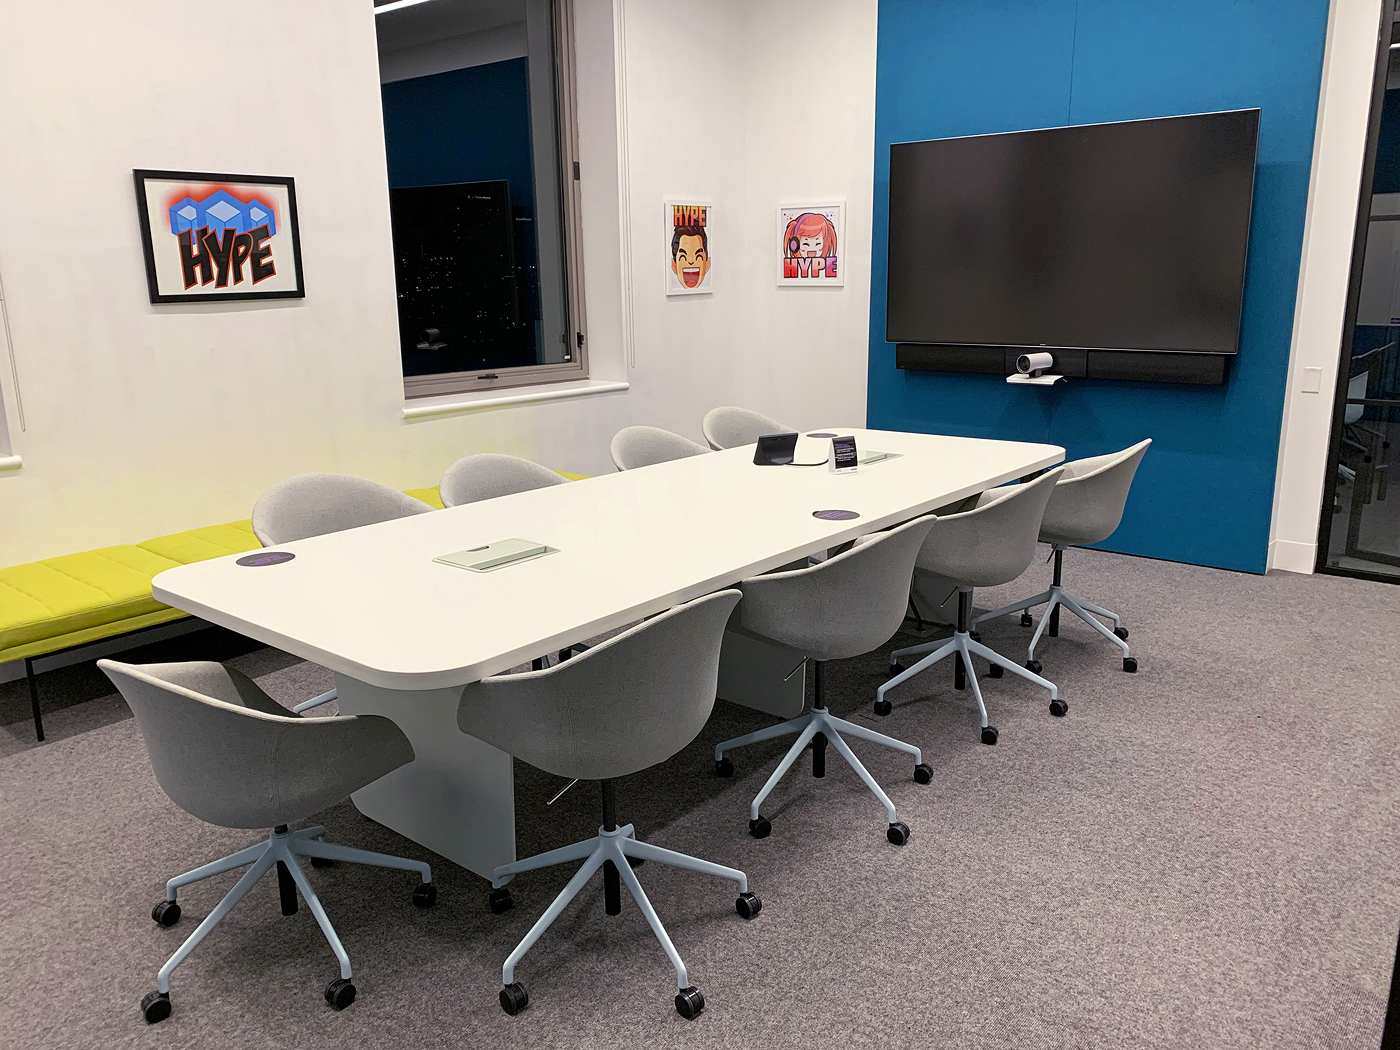 Conference rooms include an Extron OCS 100C occupancy sensor in the ceiling - interior